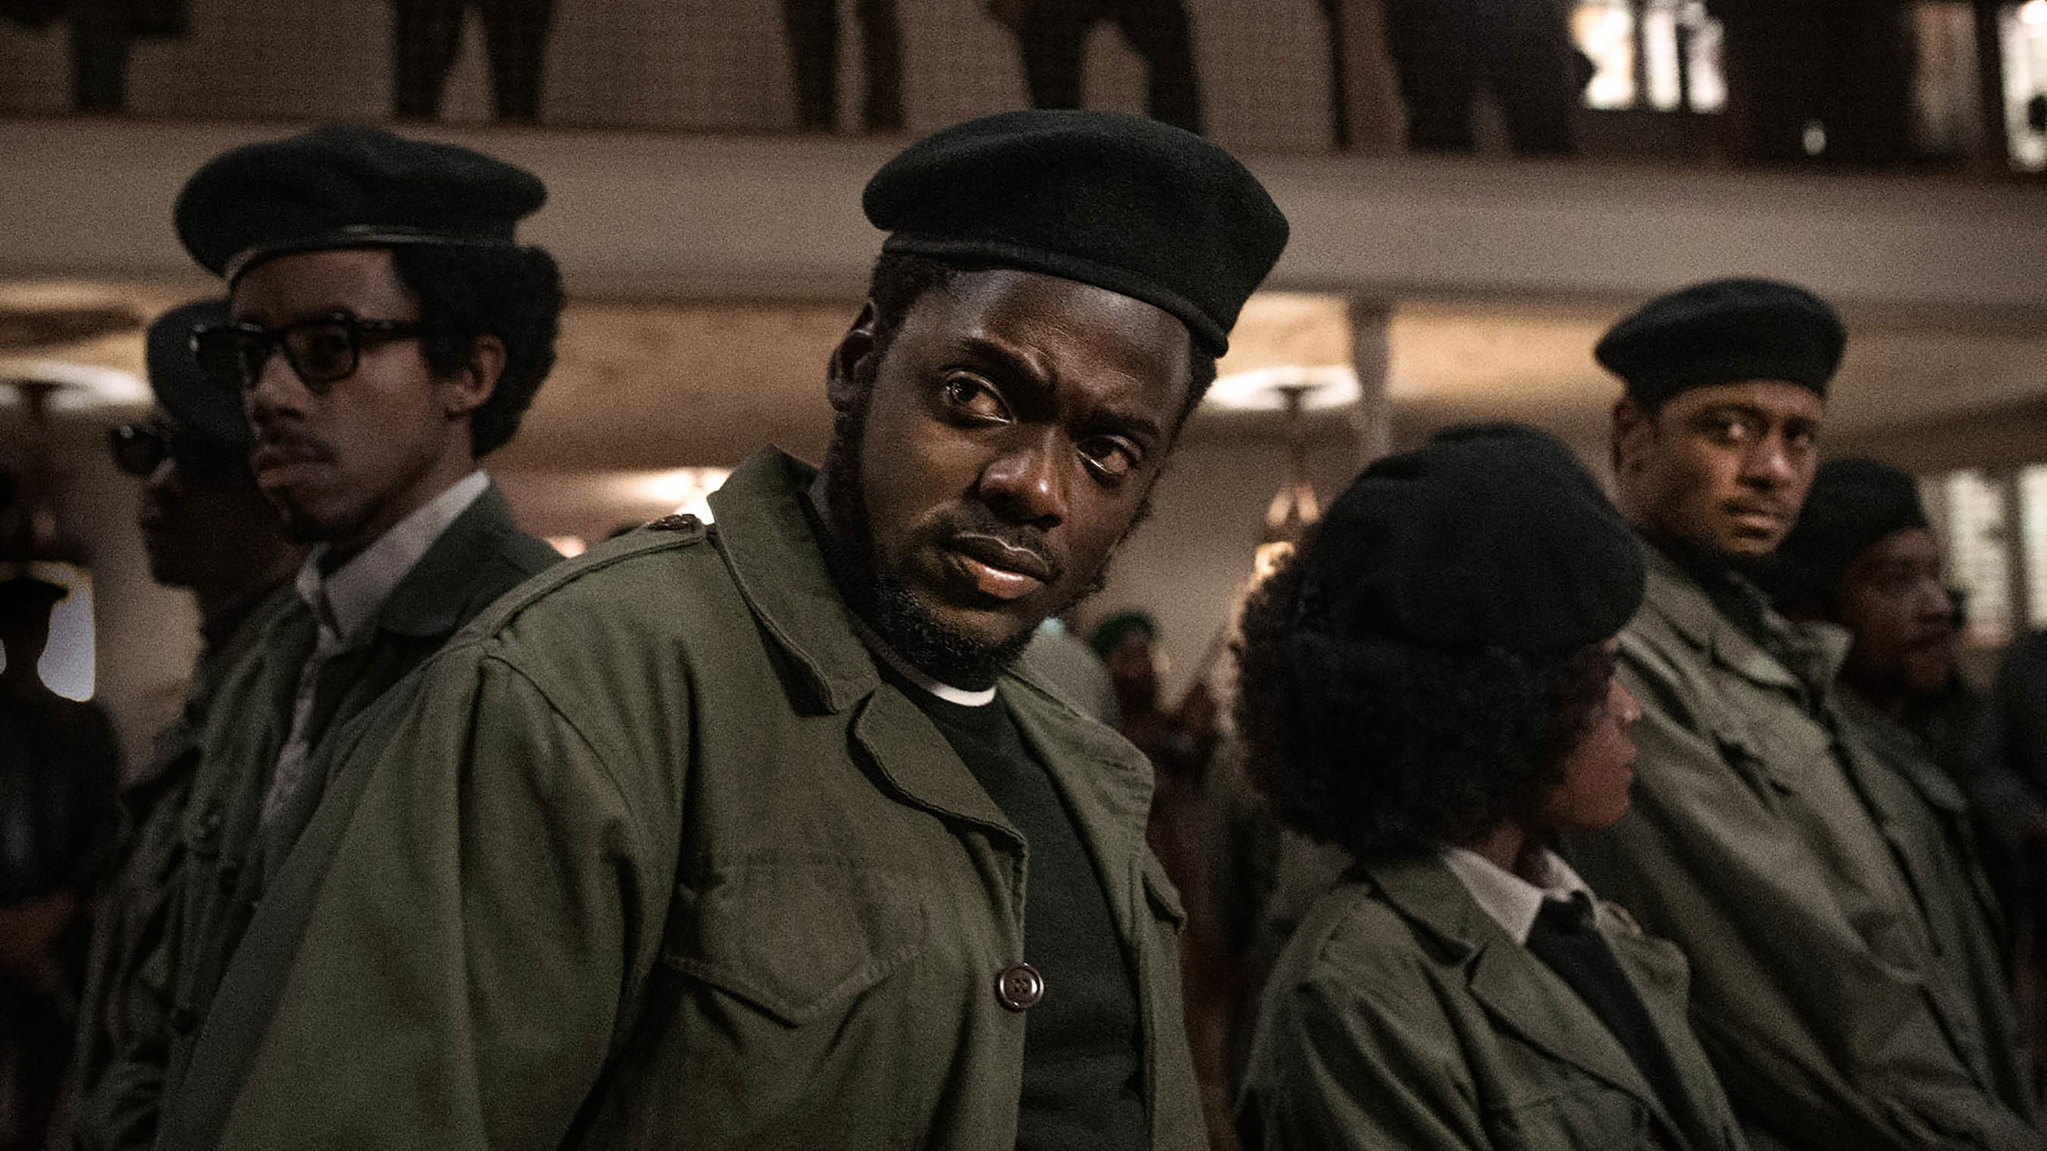 In an image from the film Judas and the Black Messiah, young Black Panthers stand wearing green jackets and black berets.